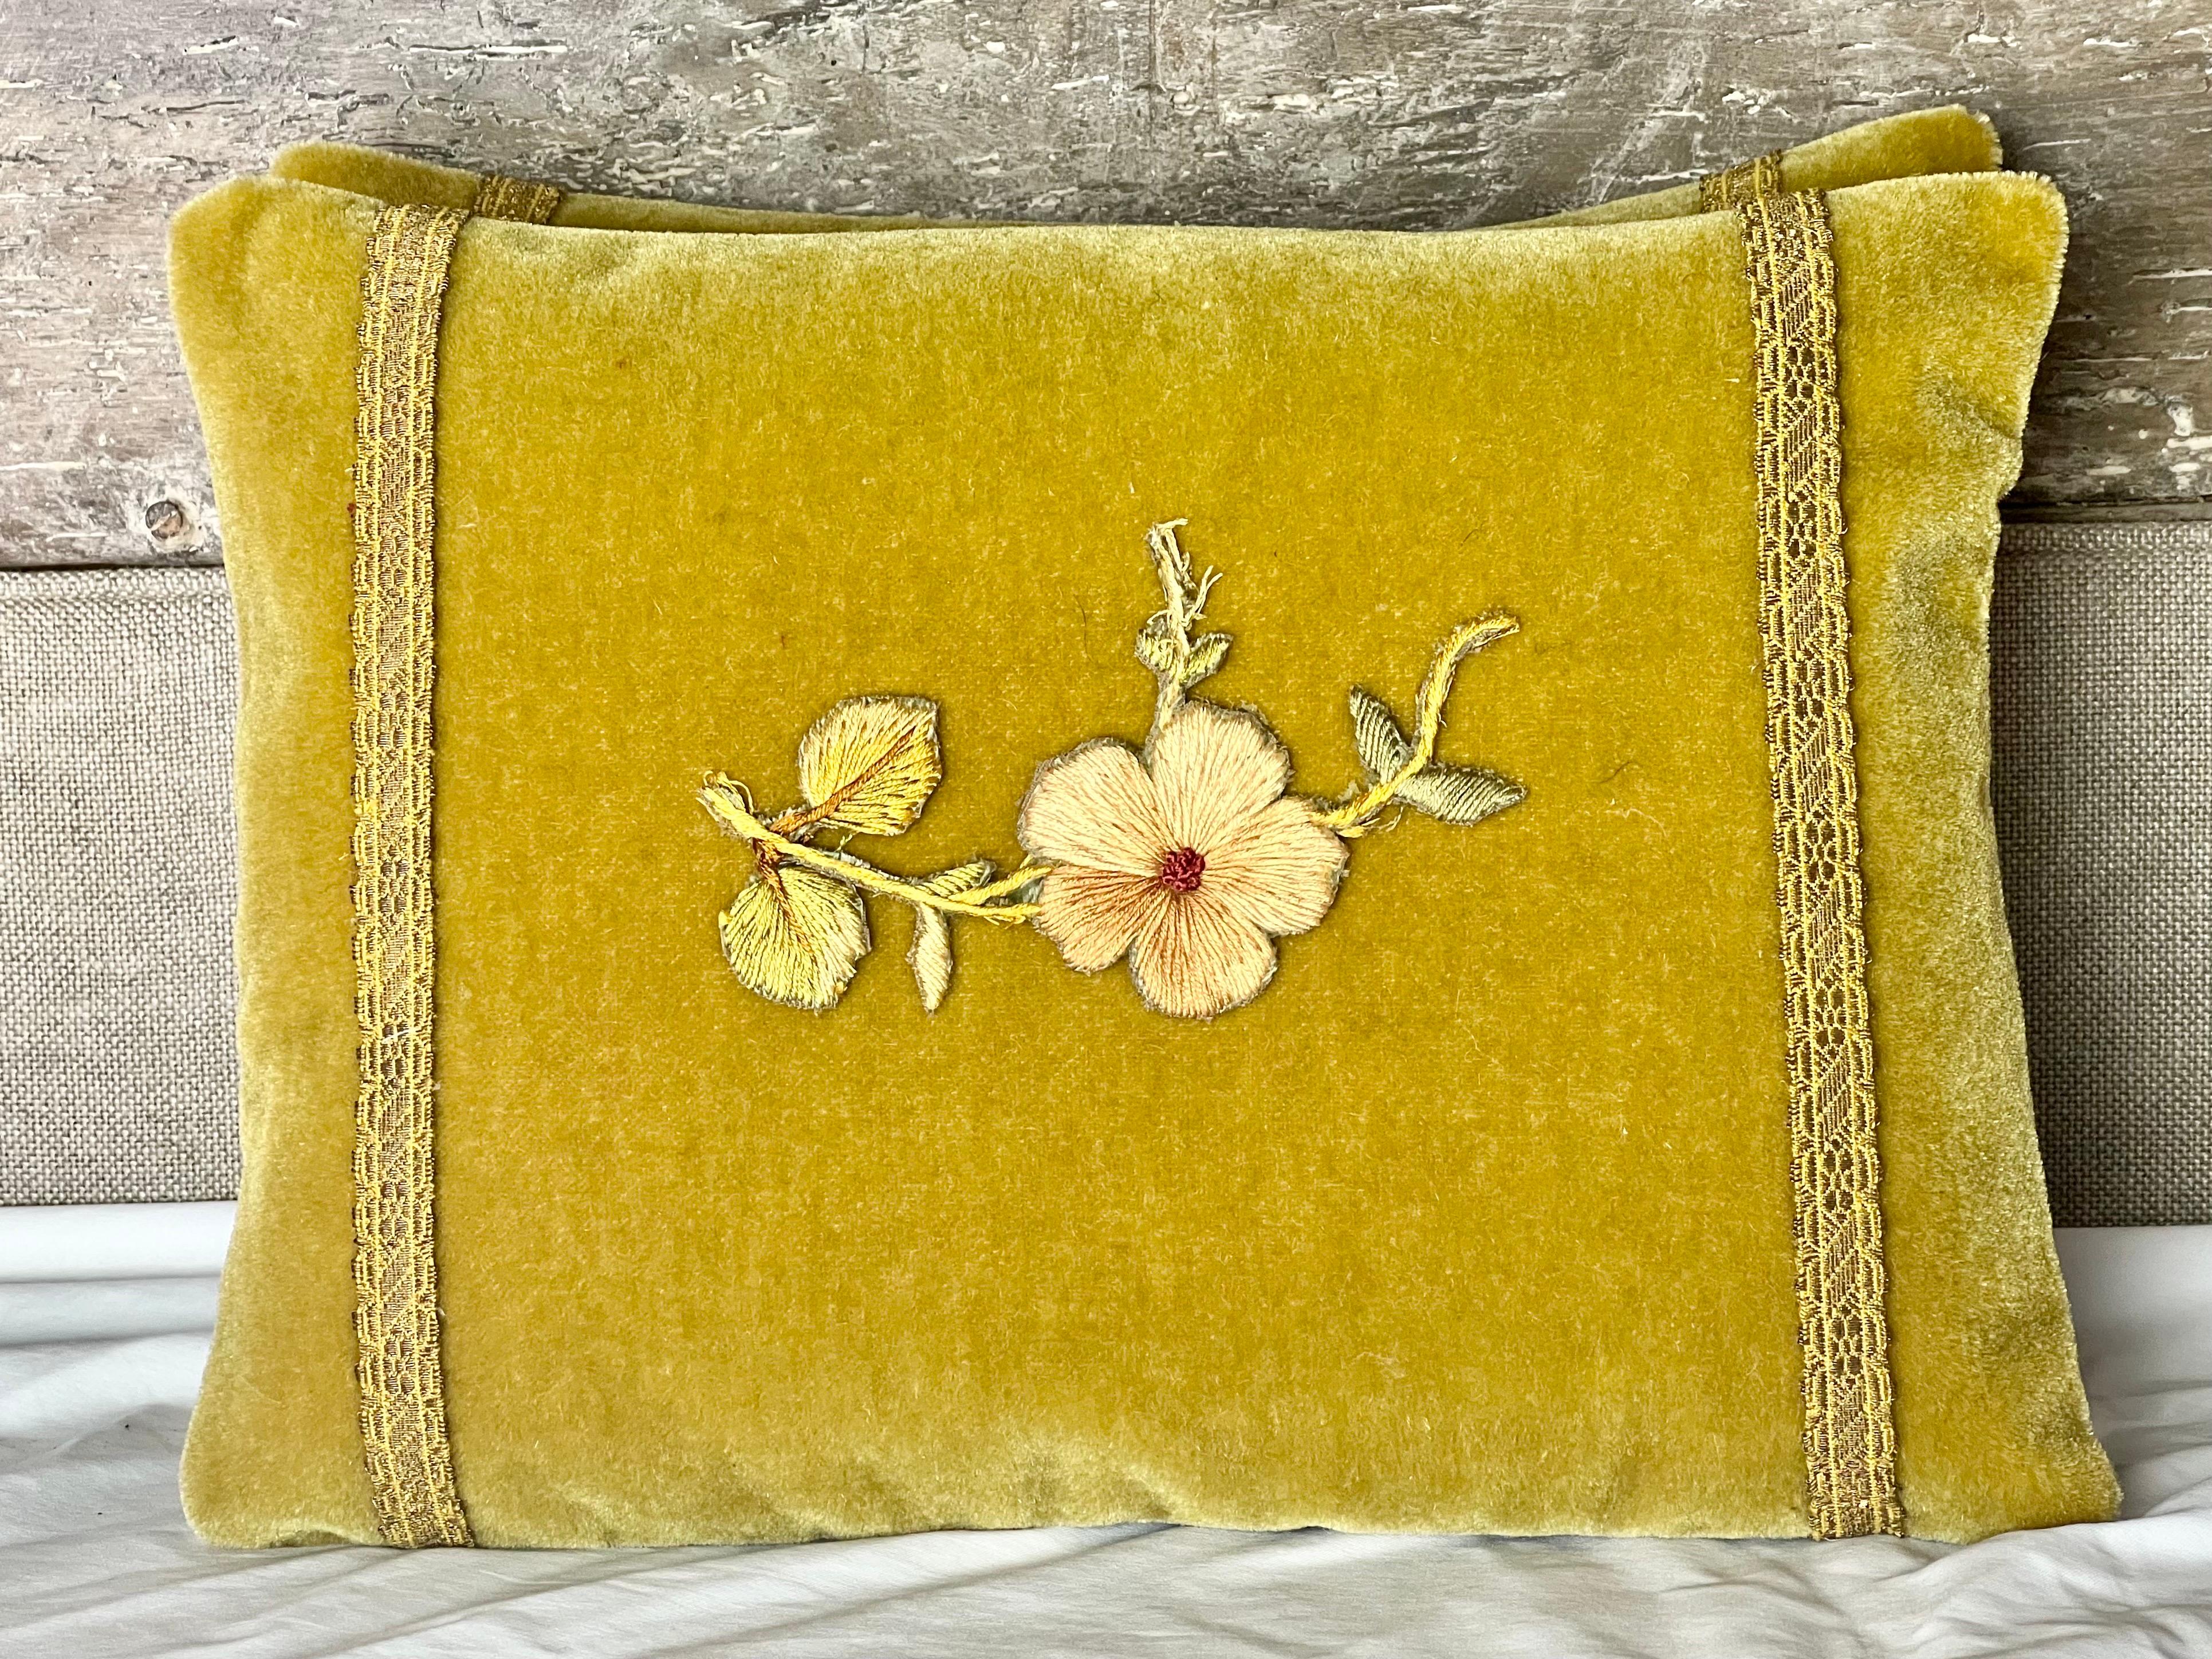 Custom pair of pillows made with 19th century silk & metallic appliques combined with contemporary mustard colored mohair. Gray silk backs, down inserts, zipper closures.